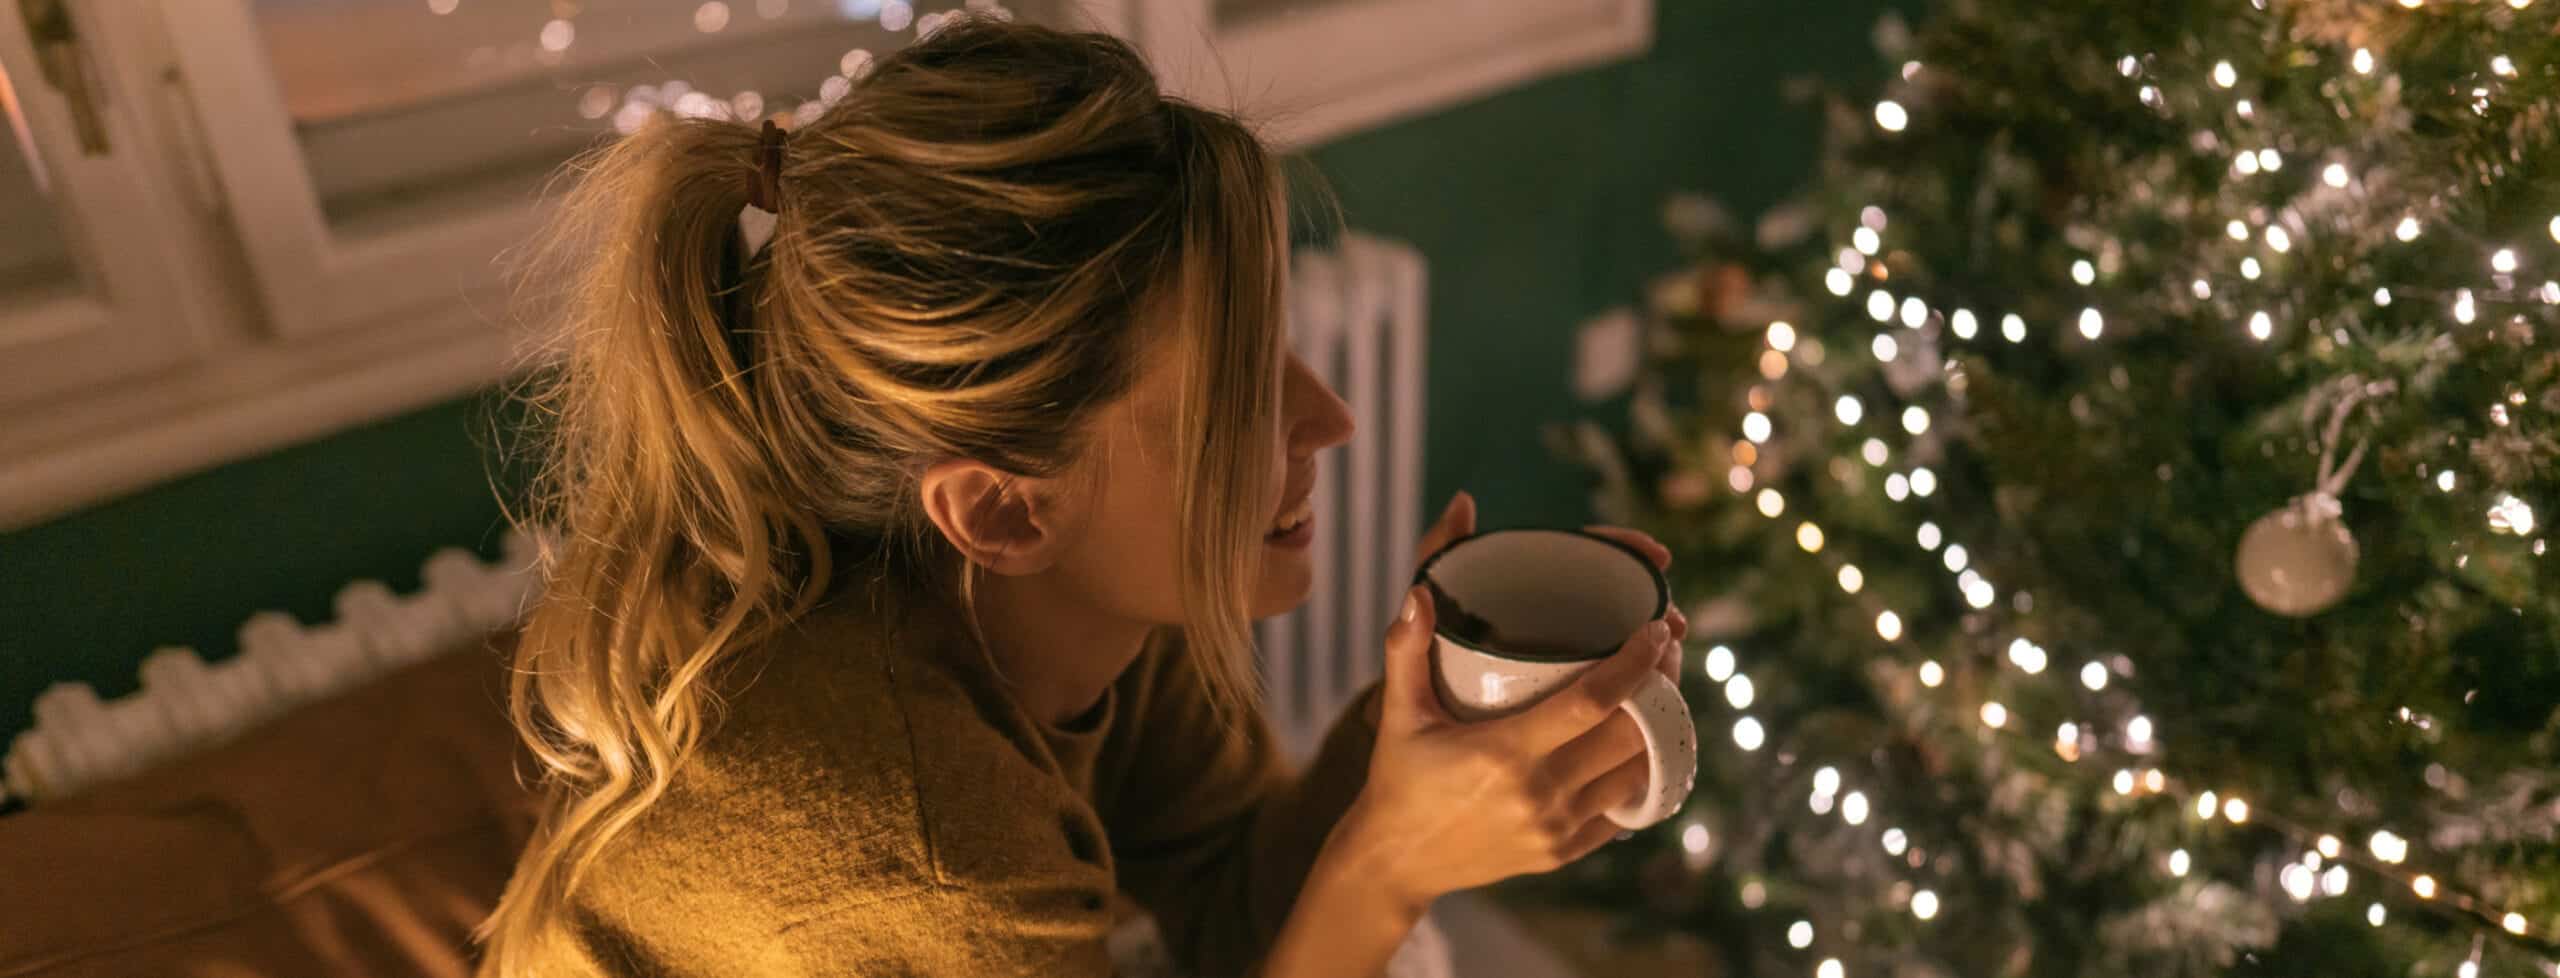 Tips to Stay Calm in the Holiday Craze